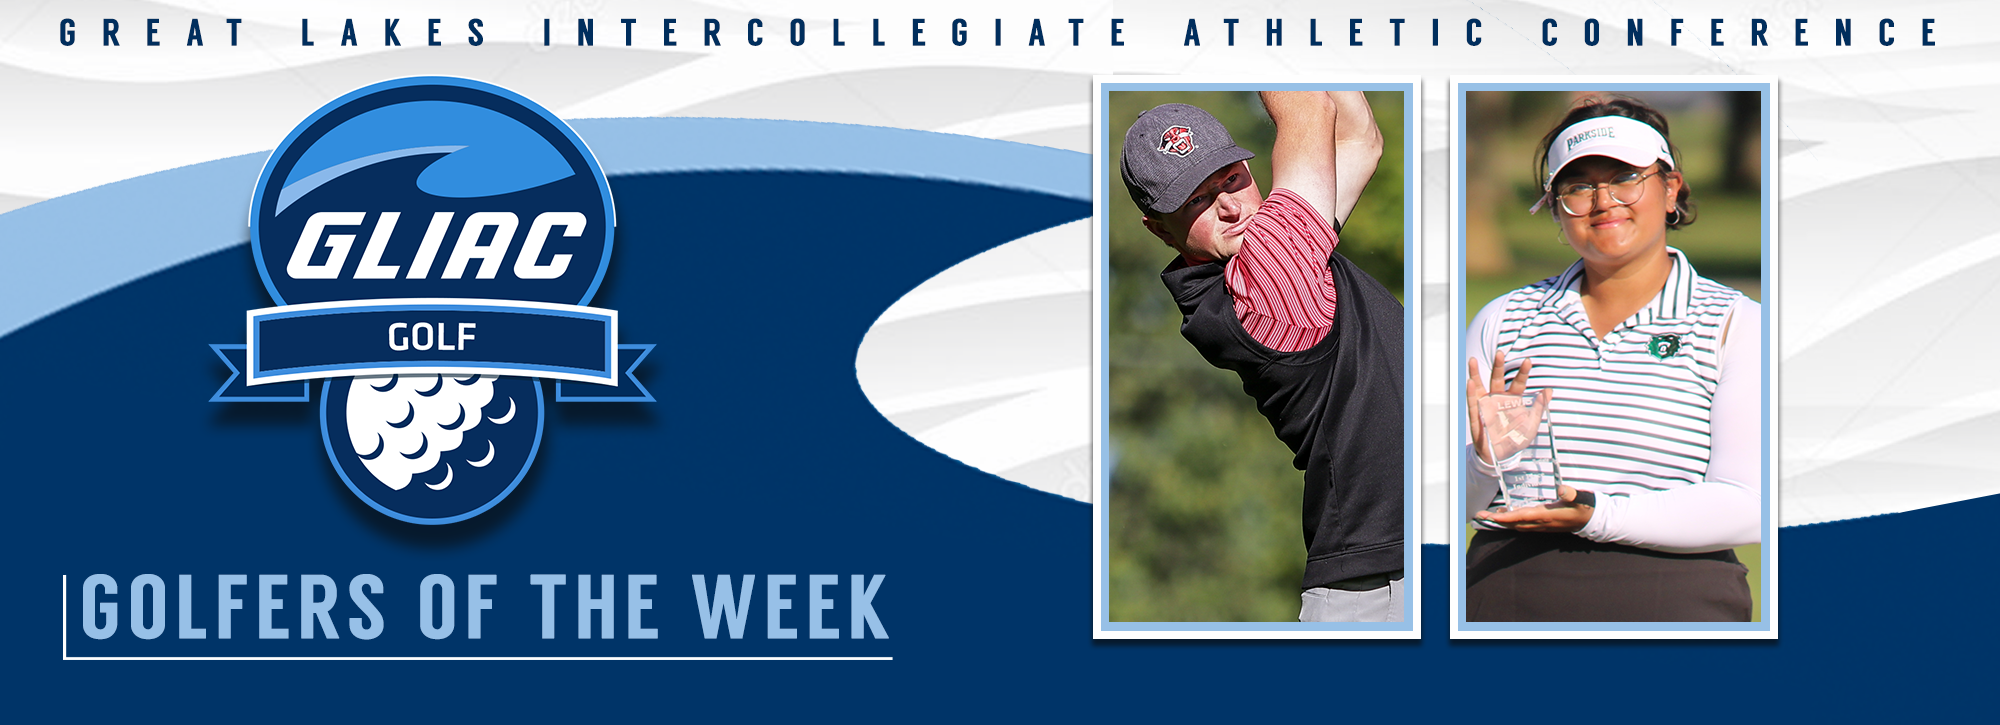 DU's Bodis and Parkside's Powell honored as GLIAC golfers of the week